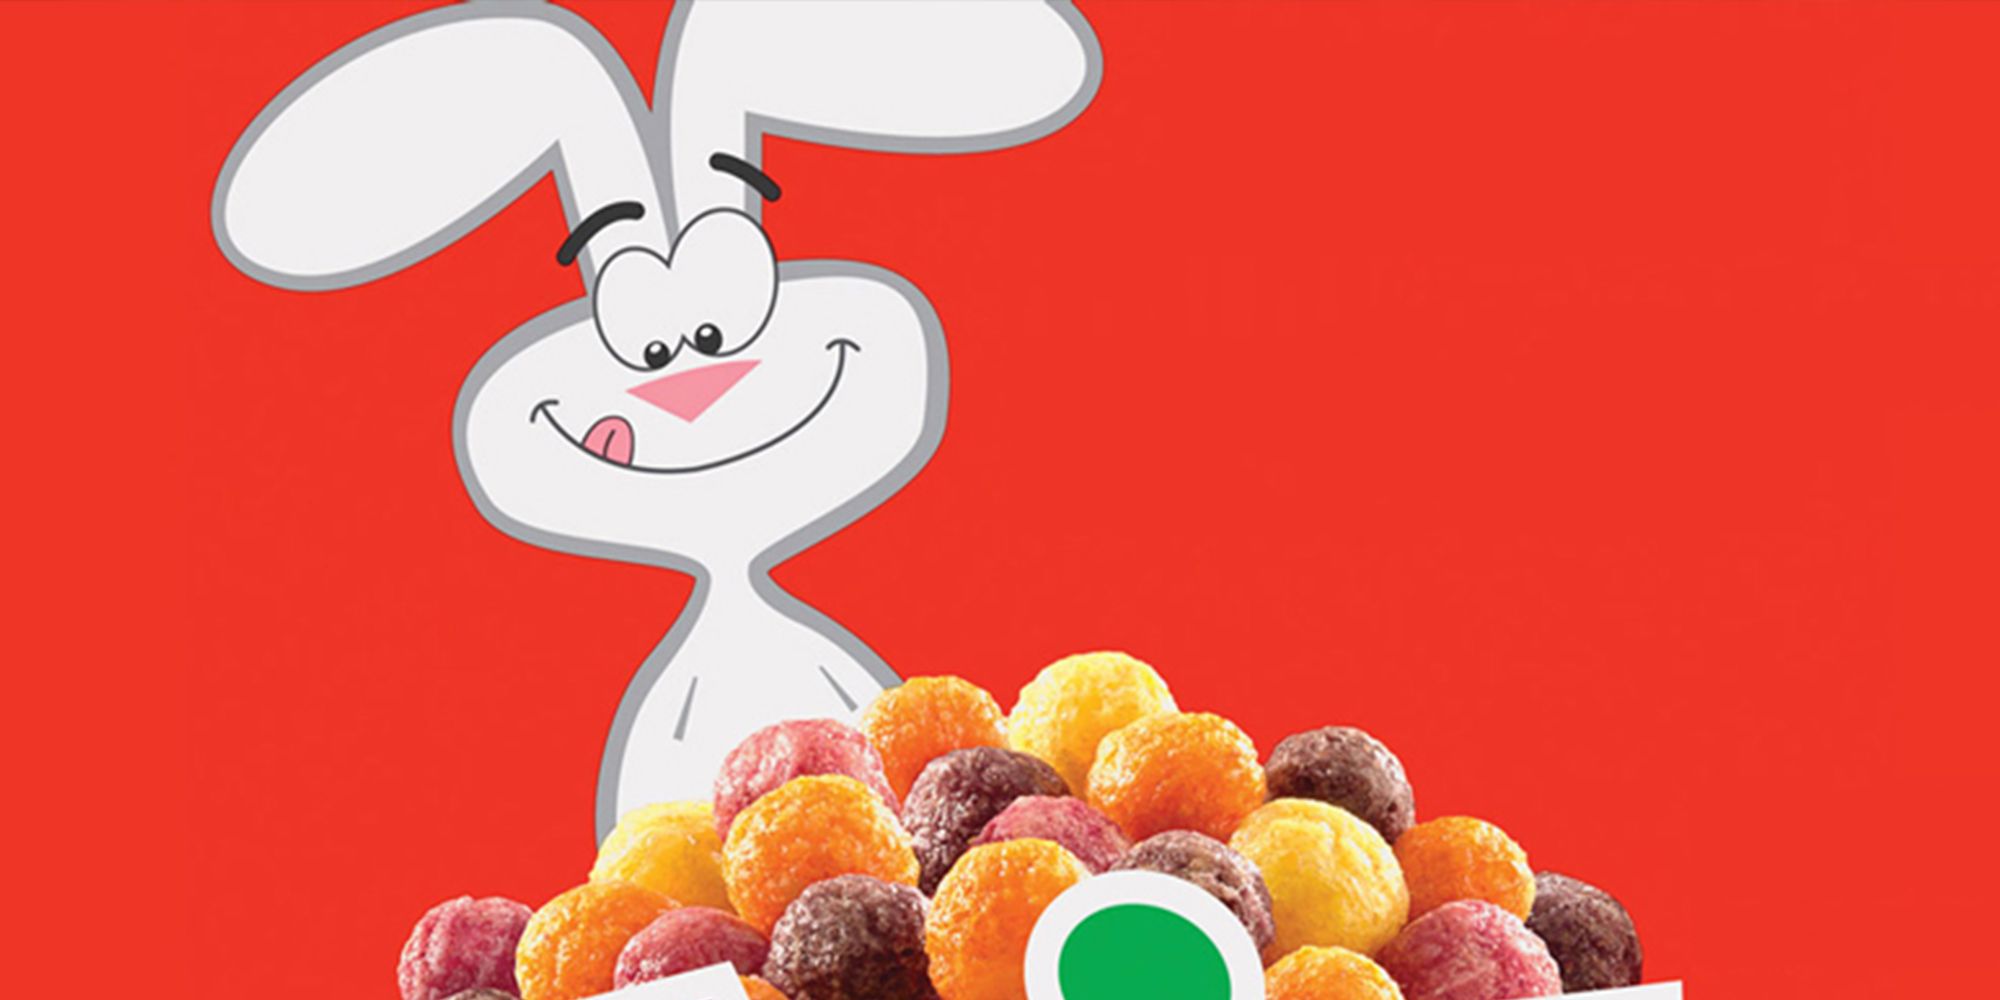 Tricks The Rabbit covets a tasty bowl of Trix cereal.